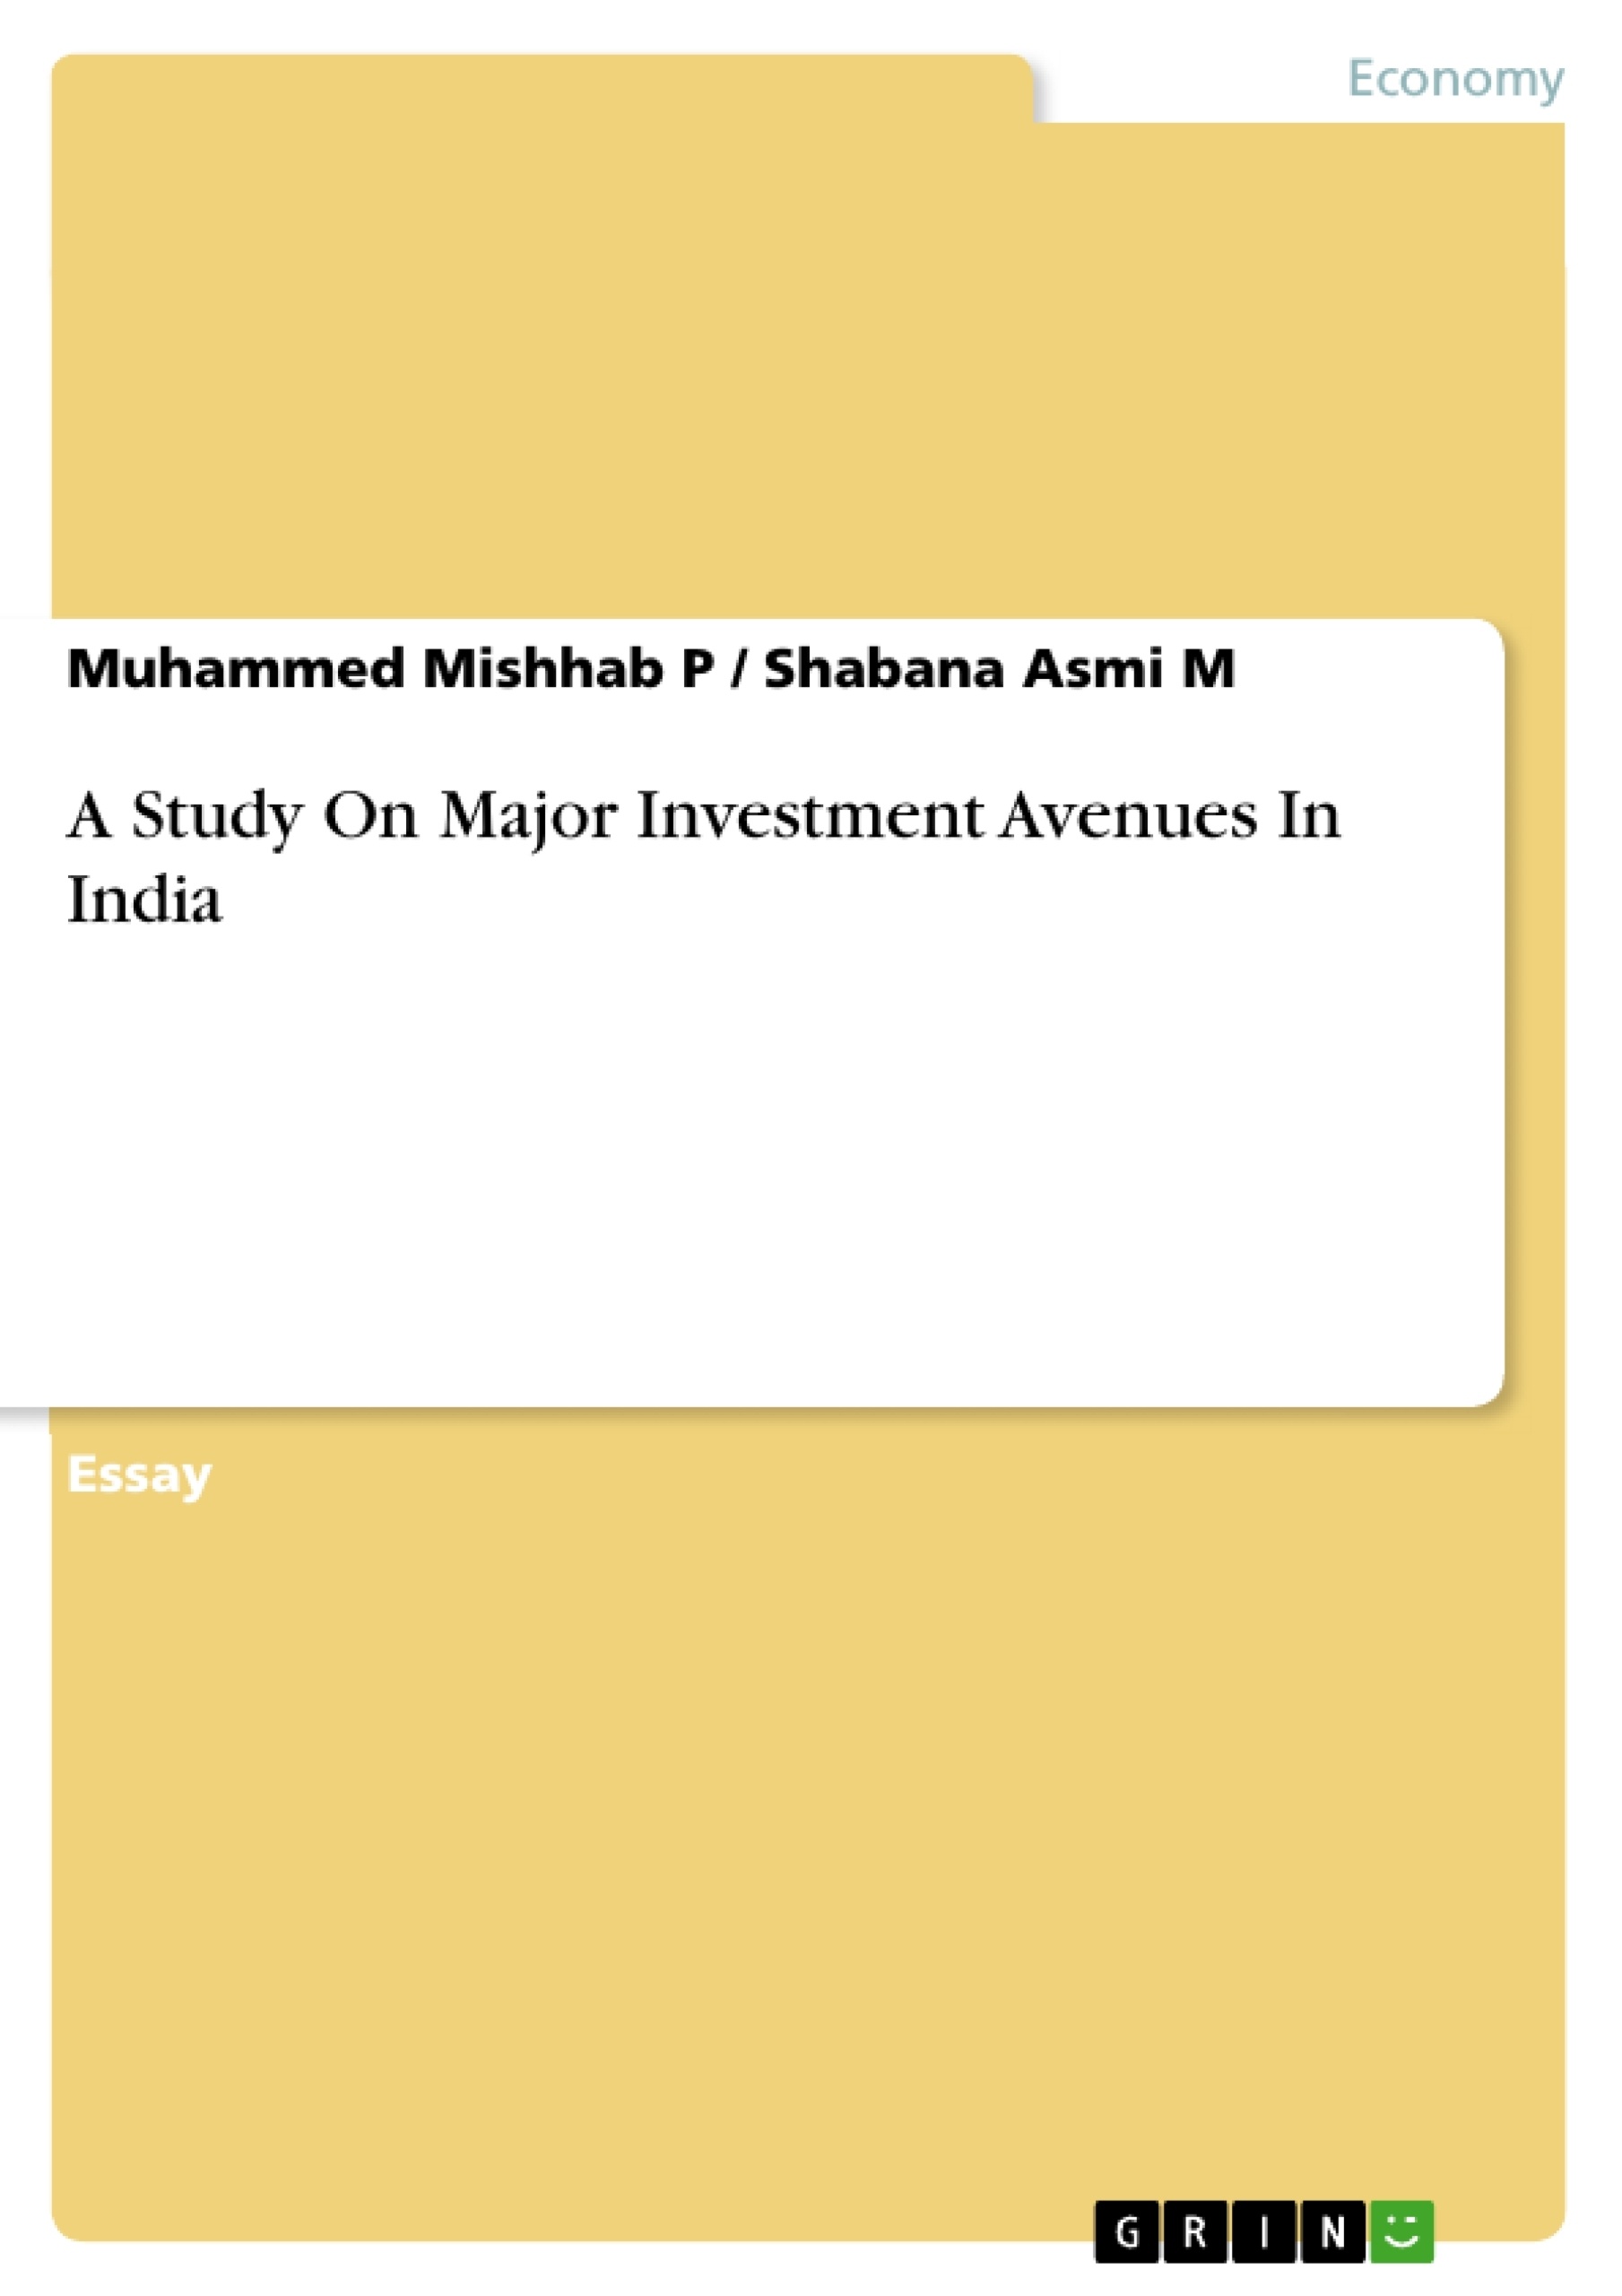 Title: A Study On Major Investment Avenues In India